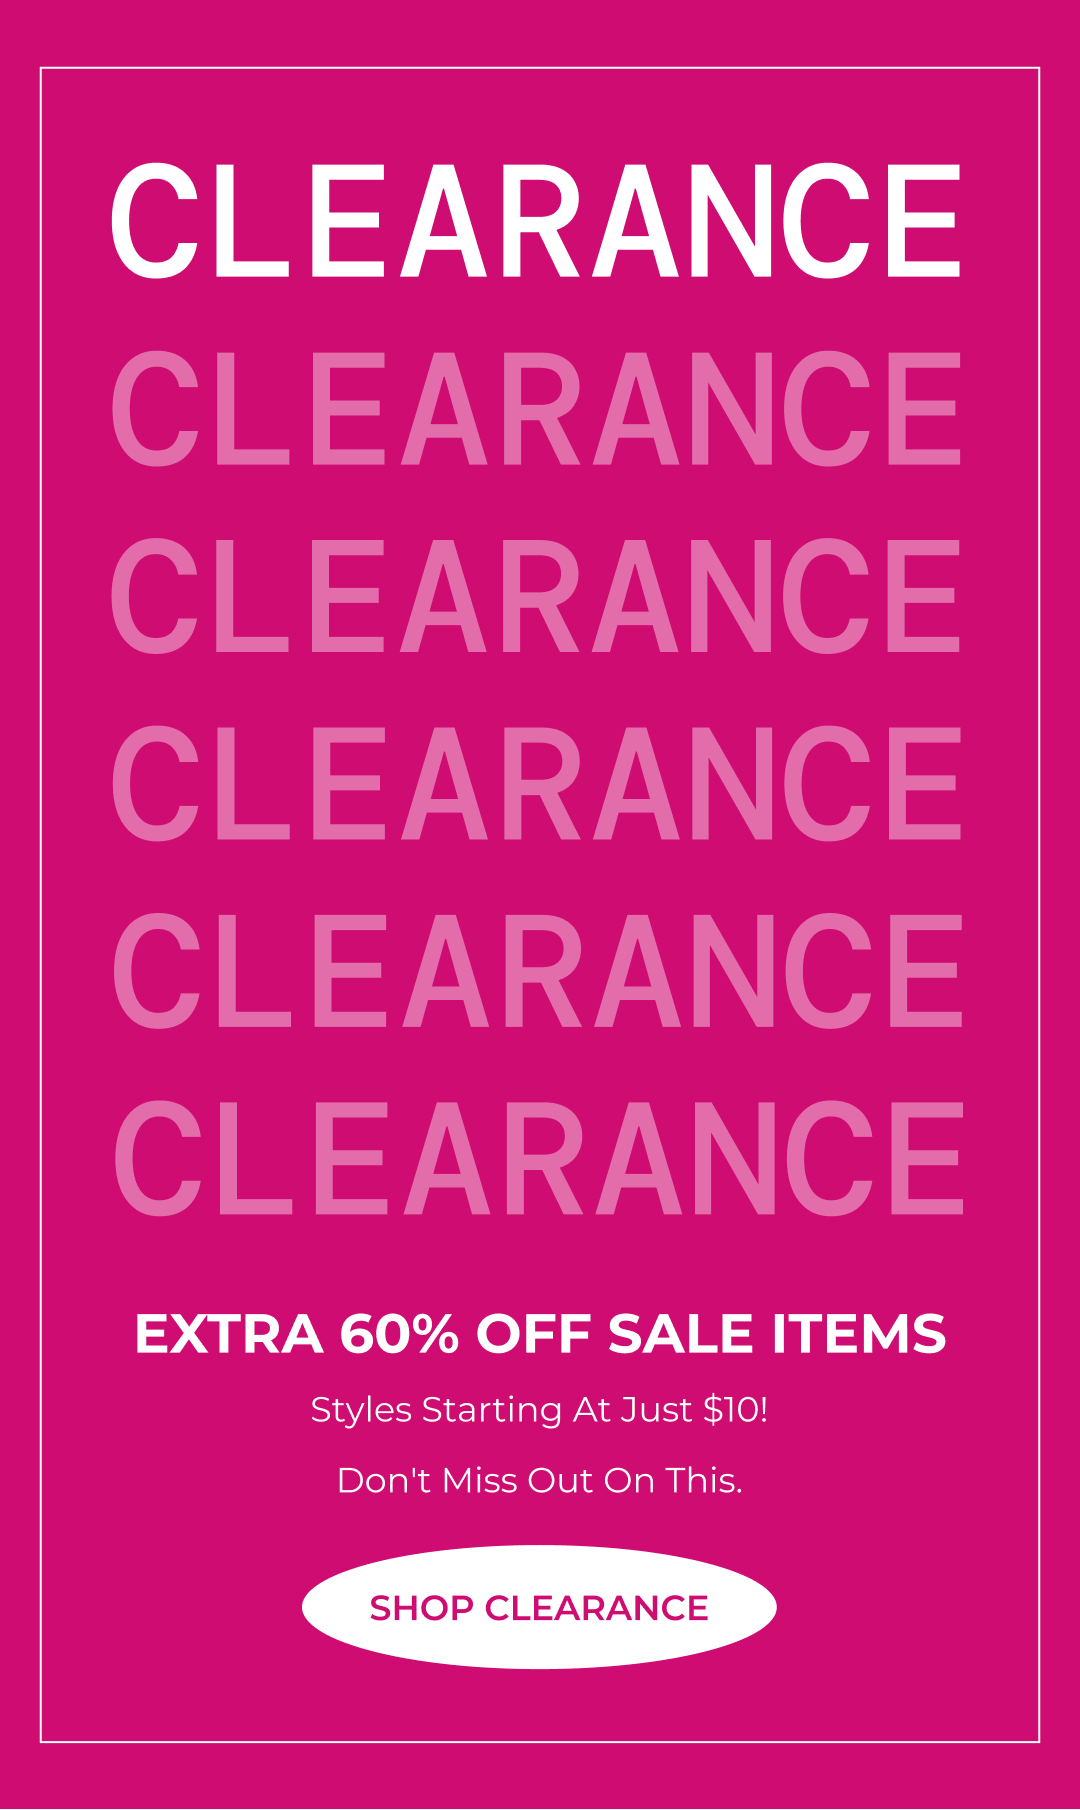 Clearance | Extra 60% Off Sale Items - Shop Clearance